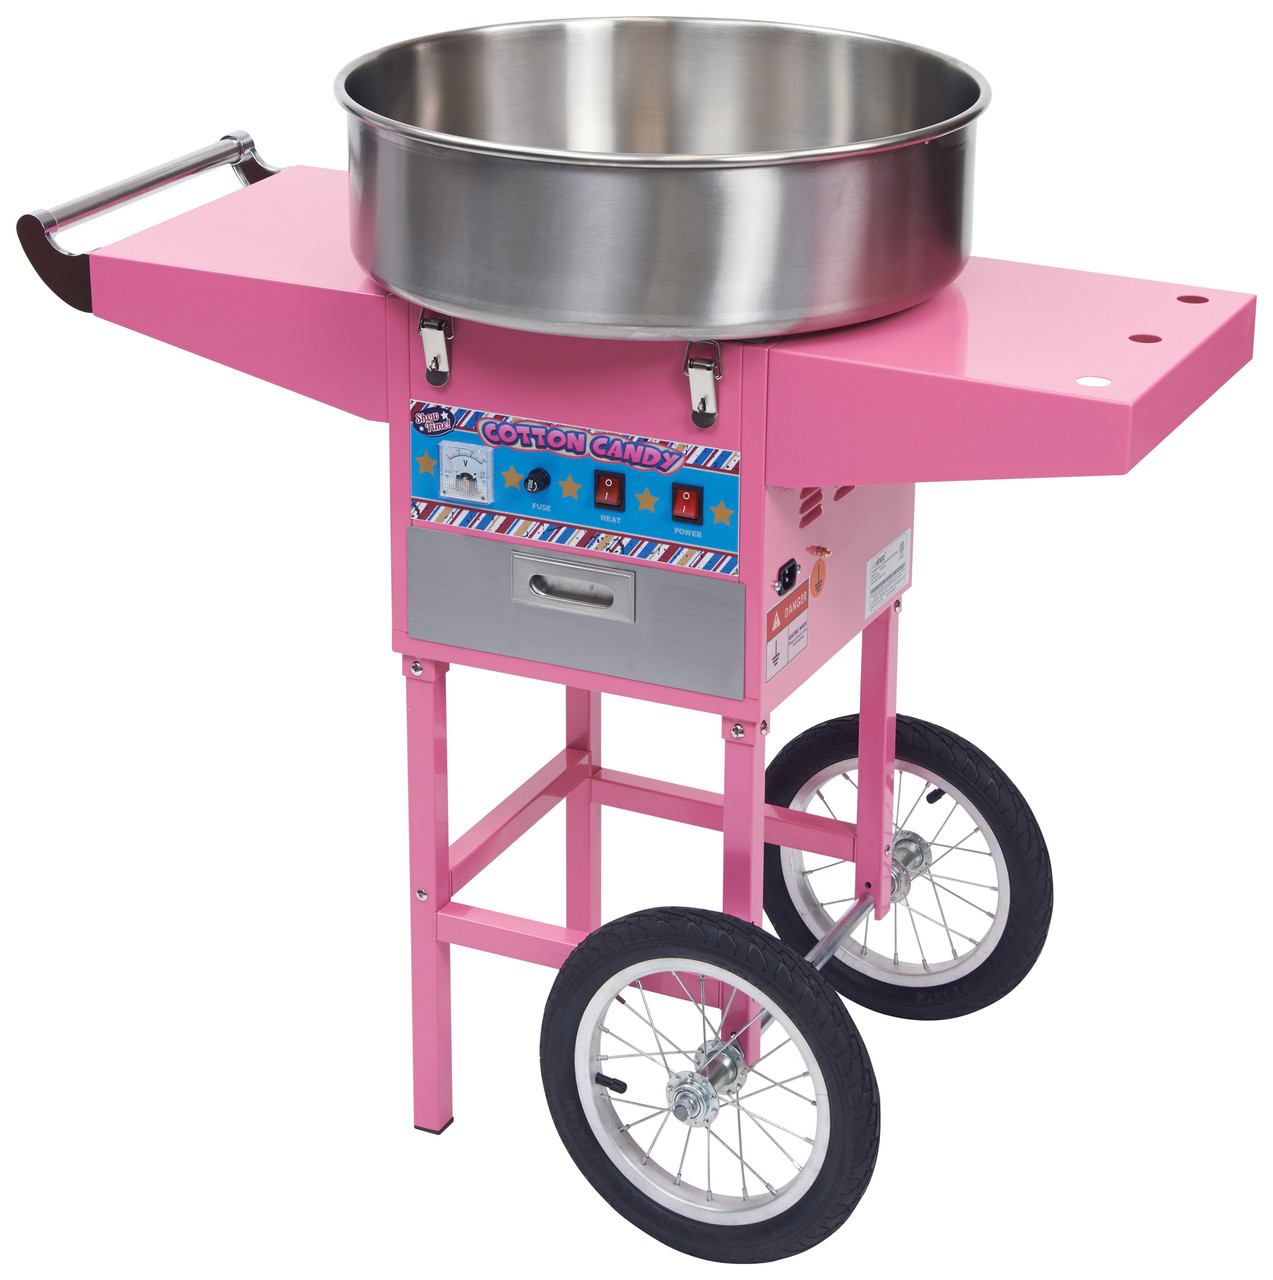 Winco Show Time Cotton Candy Machine with 20.5" S/S Bowl and Cart